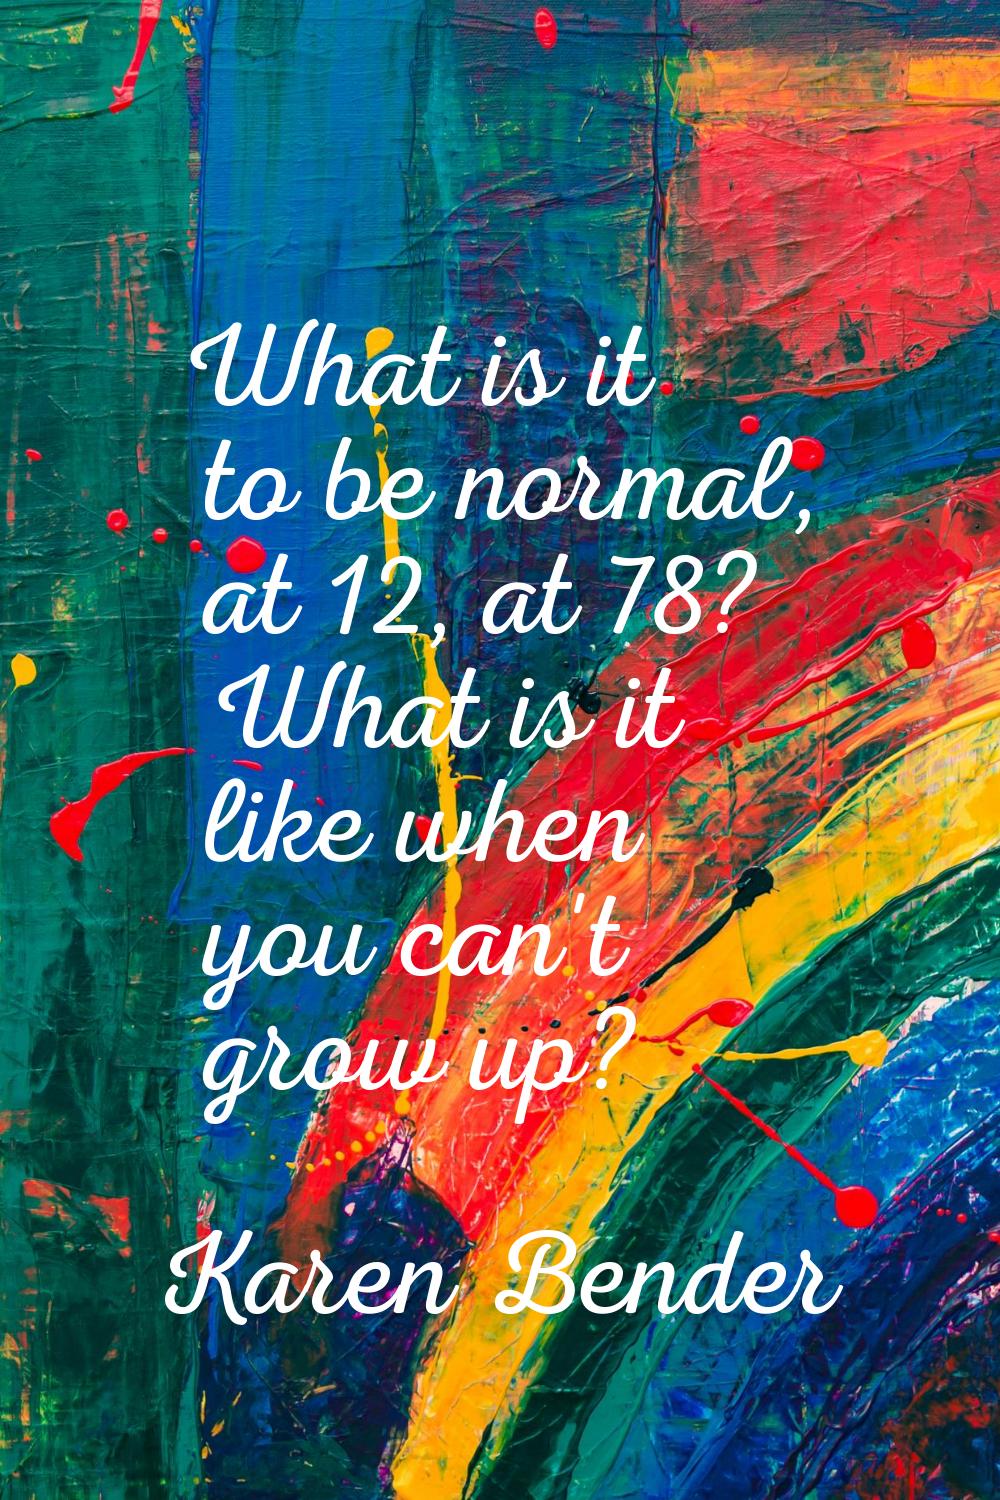 What is it to be normal, at 12, at 78? What is it like when you can't grow up?